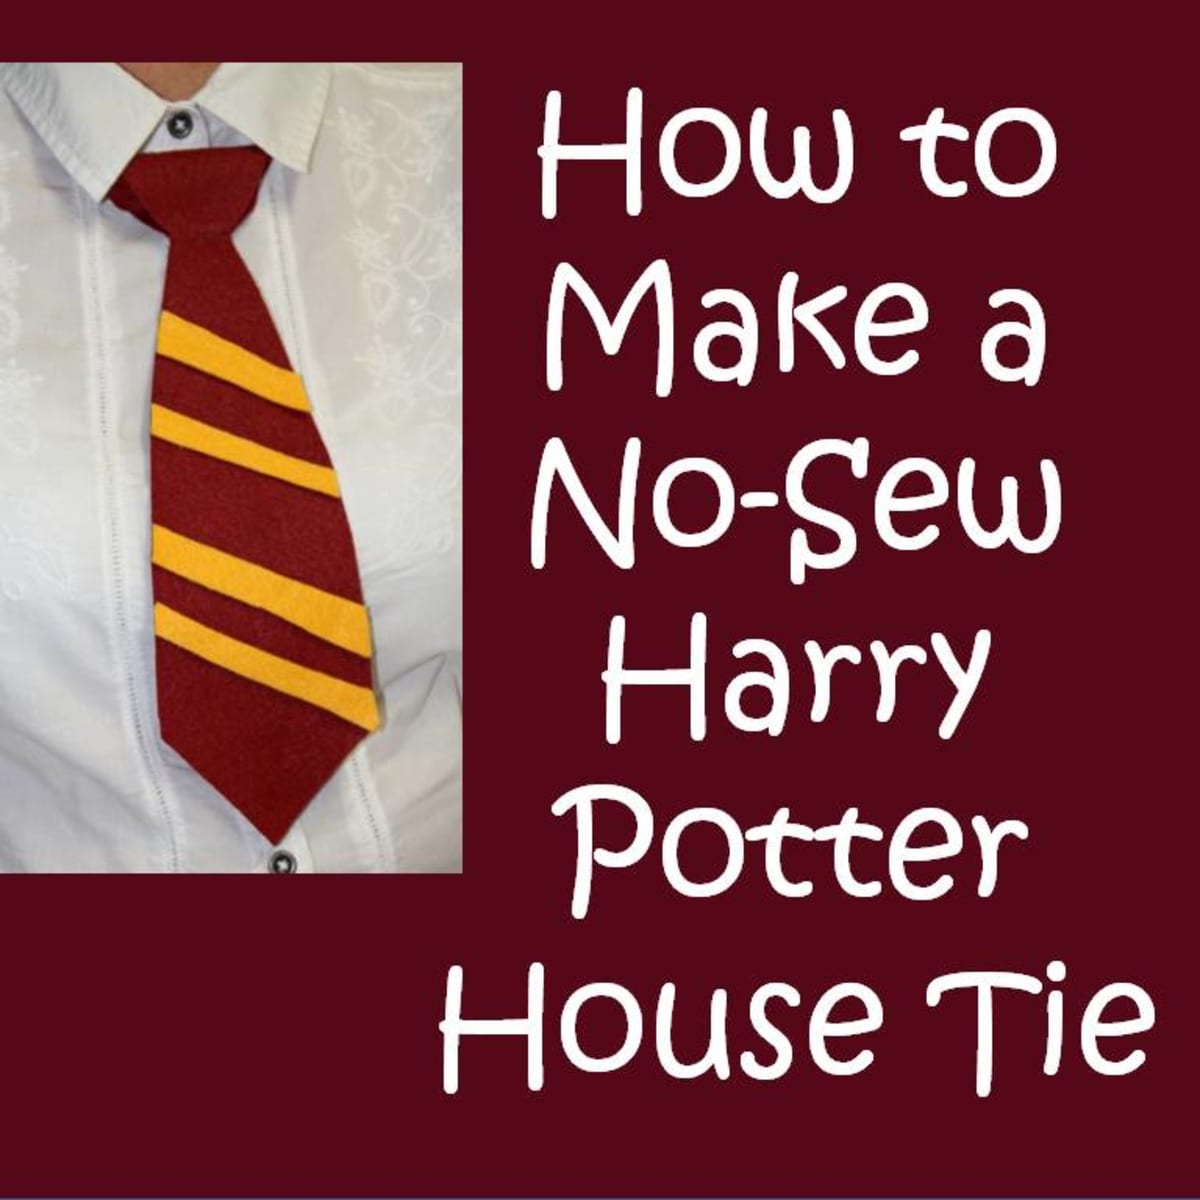 How to Make a No-Sew Harry Potter House Tie - Holidappy